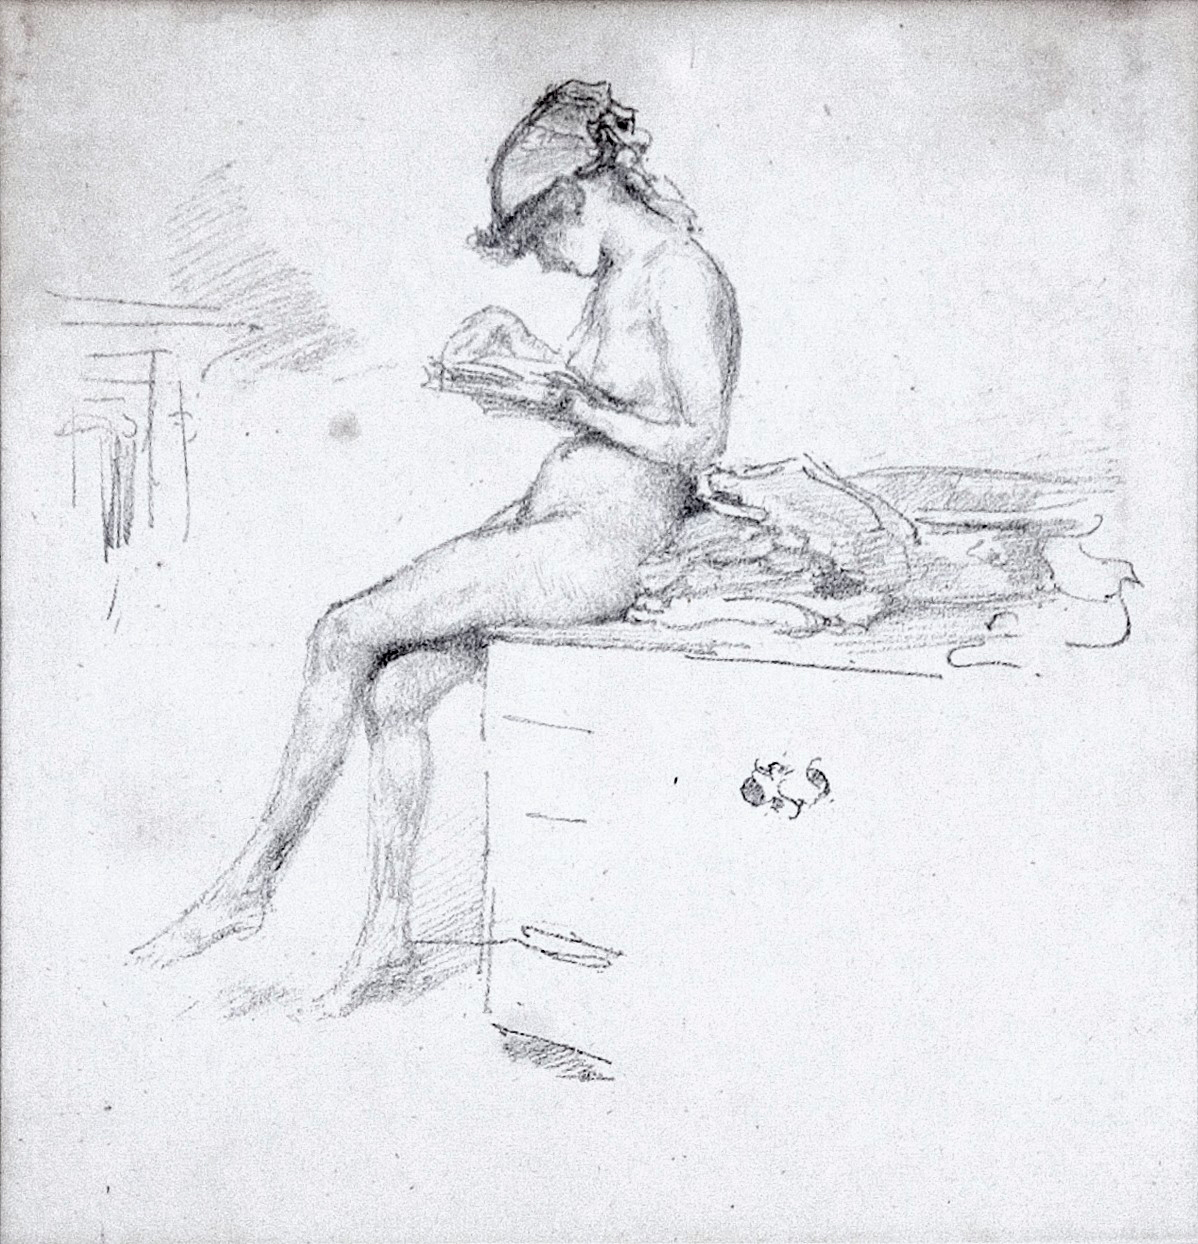 The Little Nude Model Reading